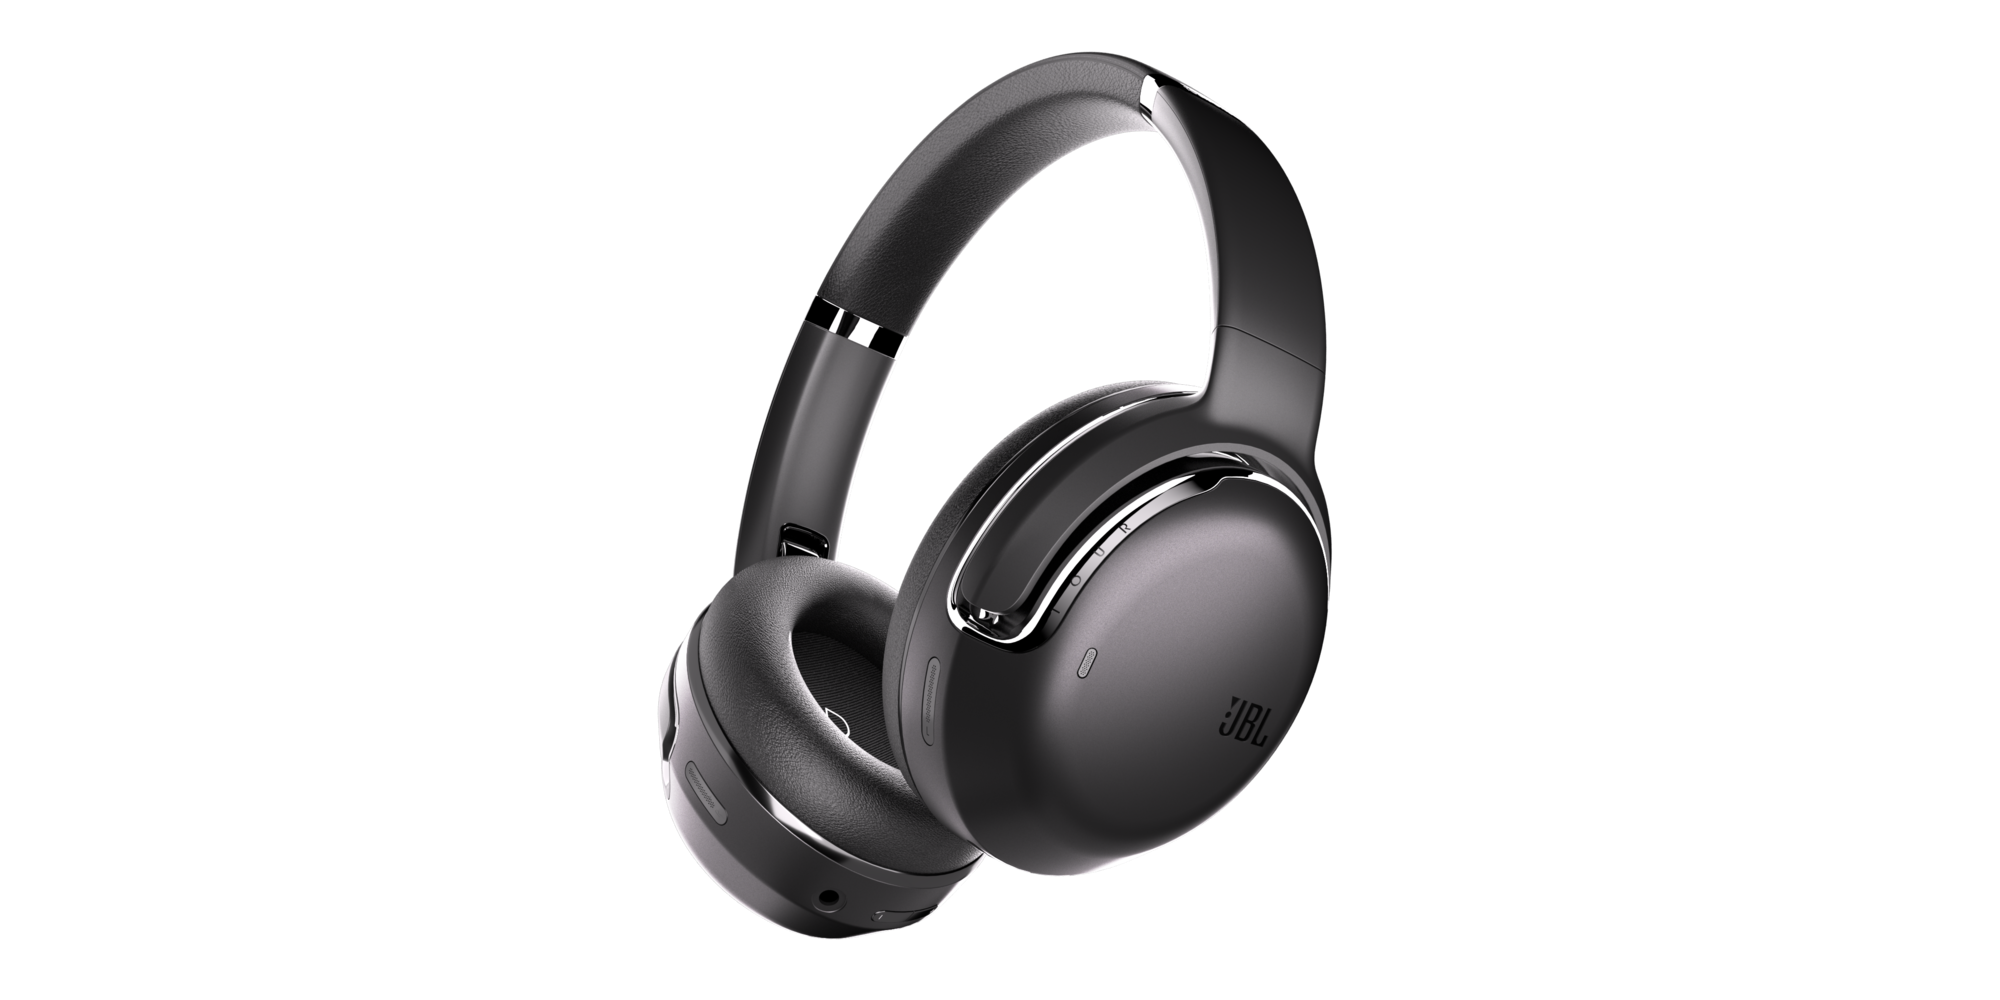 JBL headphones launch with ANC, Bluetooth 5.3 and up to 50 hours of battery use - NotebookCheck.net News